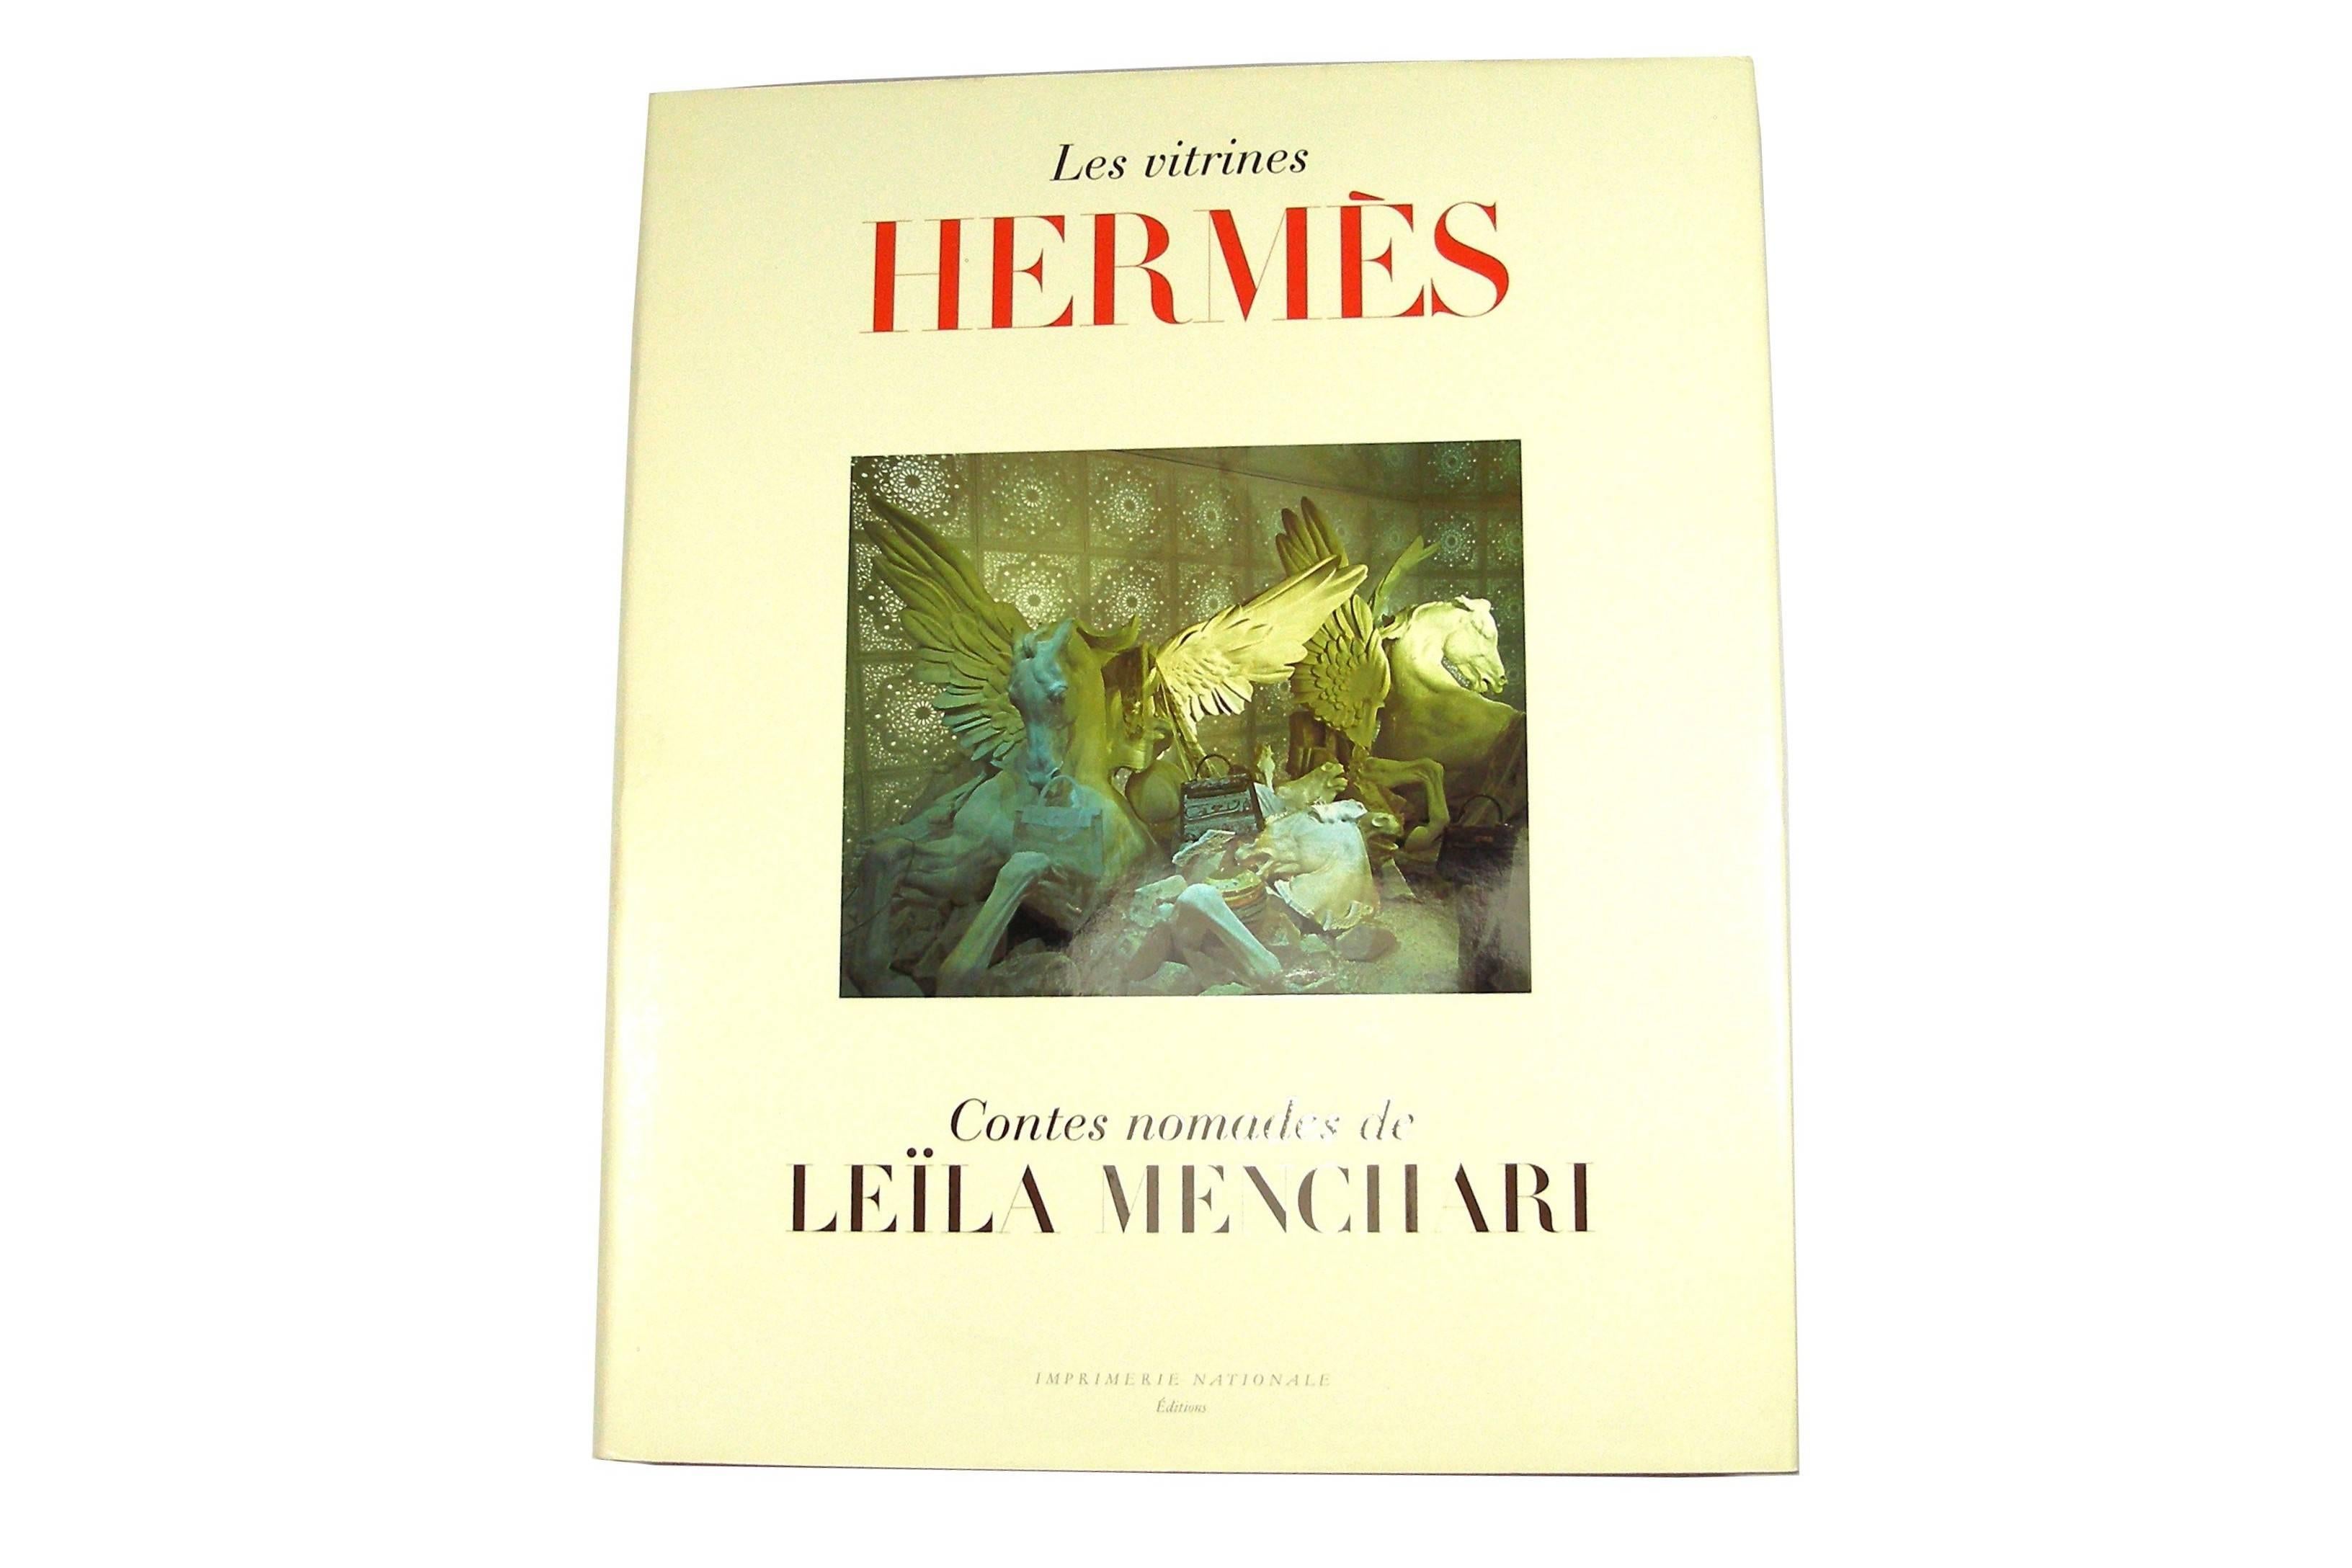 RARE HERMES Les Vitrines Hermes Contes Nomades Leila Menchari Book In Excellent Condition For Sale In VERGT, FR